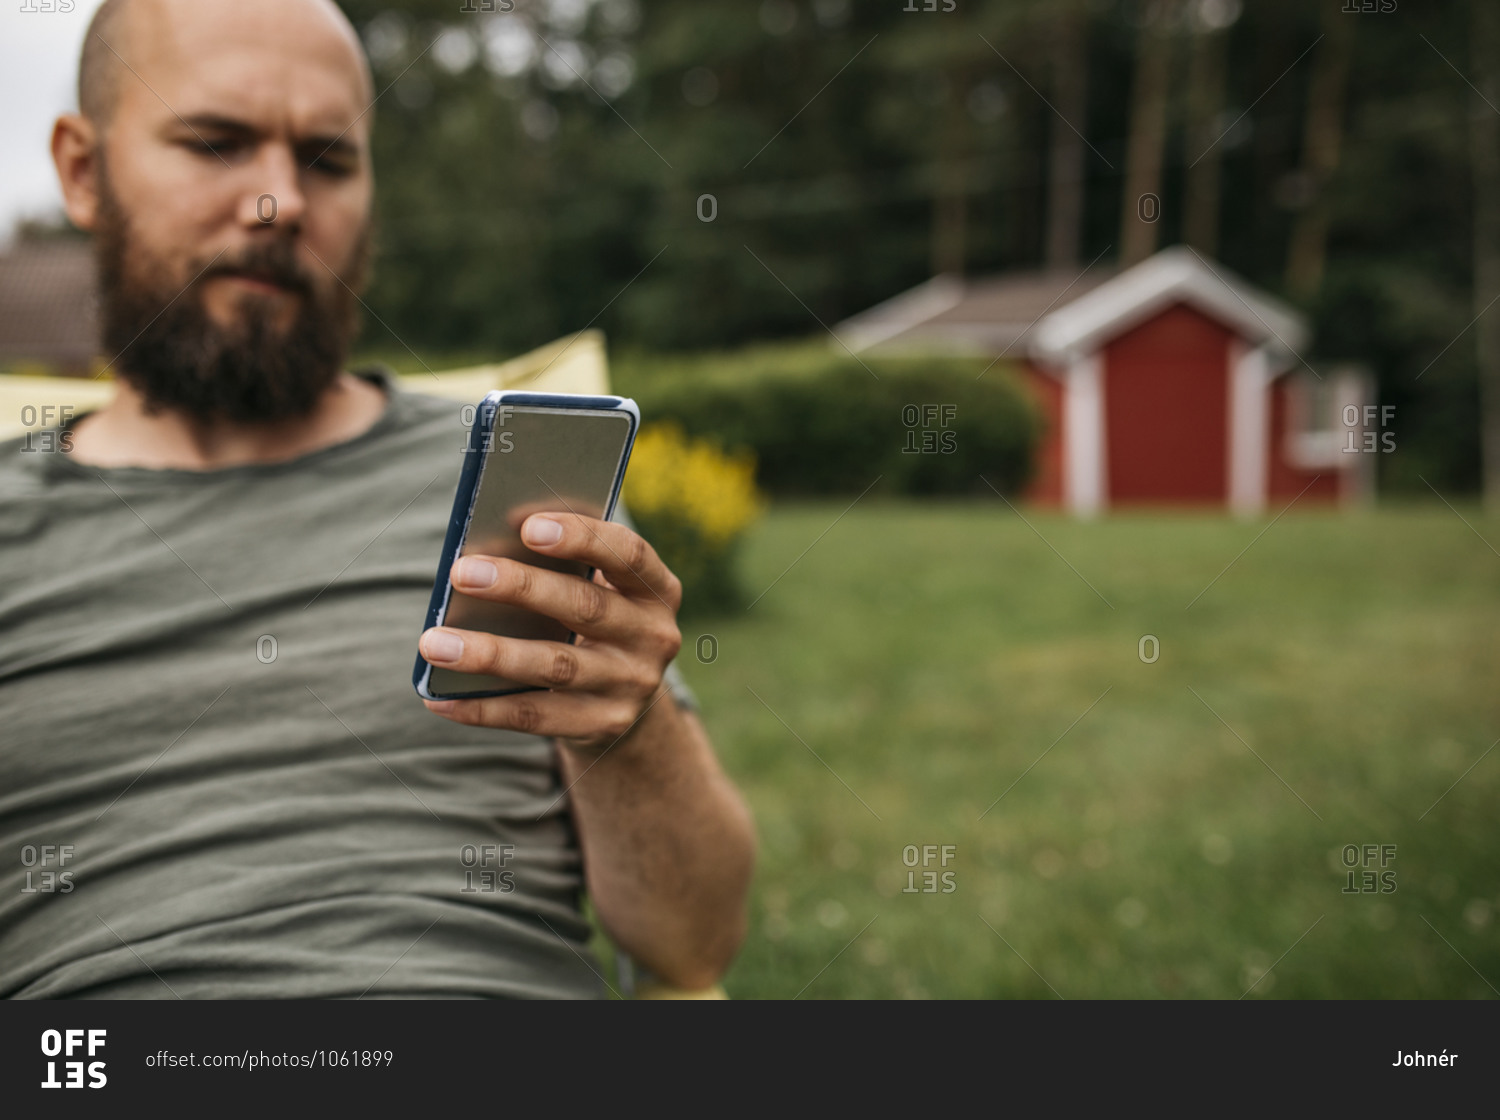 Man using cell phone from the Offset collection